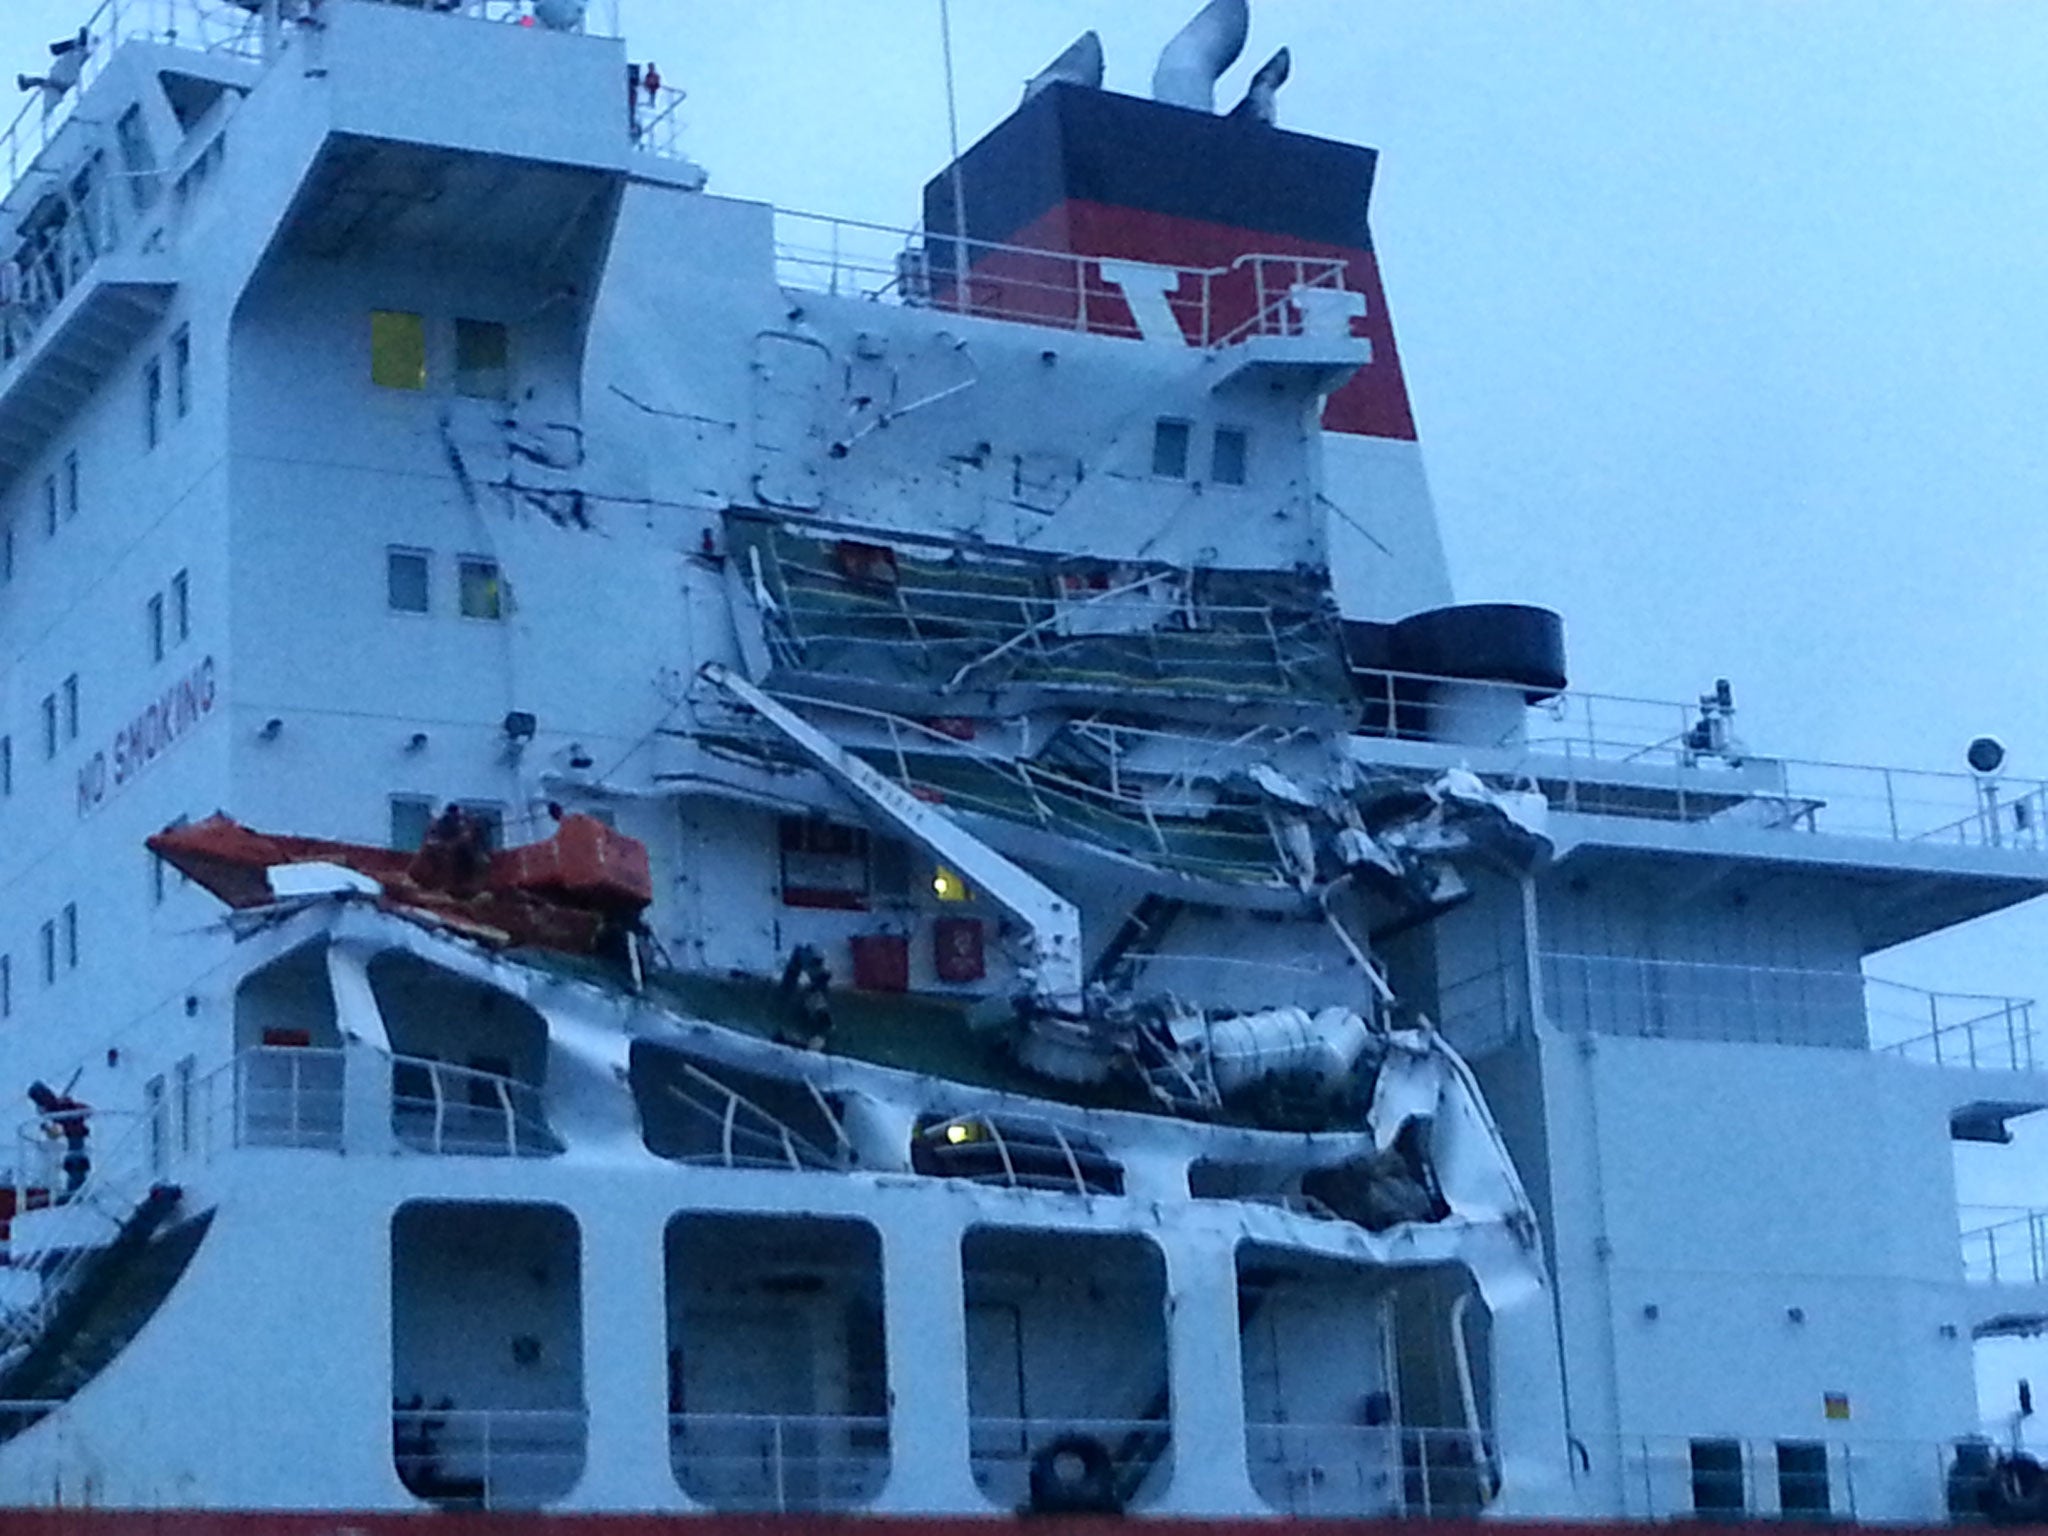 Damage to the Seafrontier oil tanker after a collision in the English Channel on 1 July